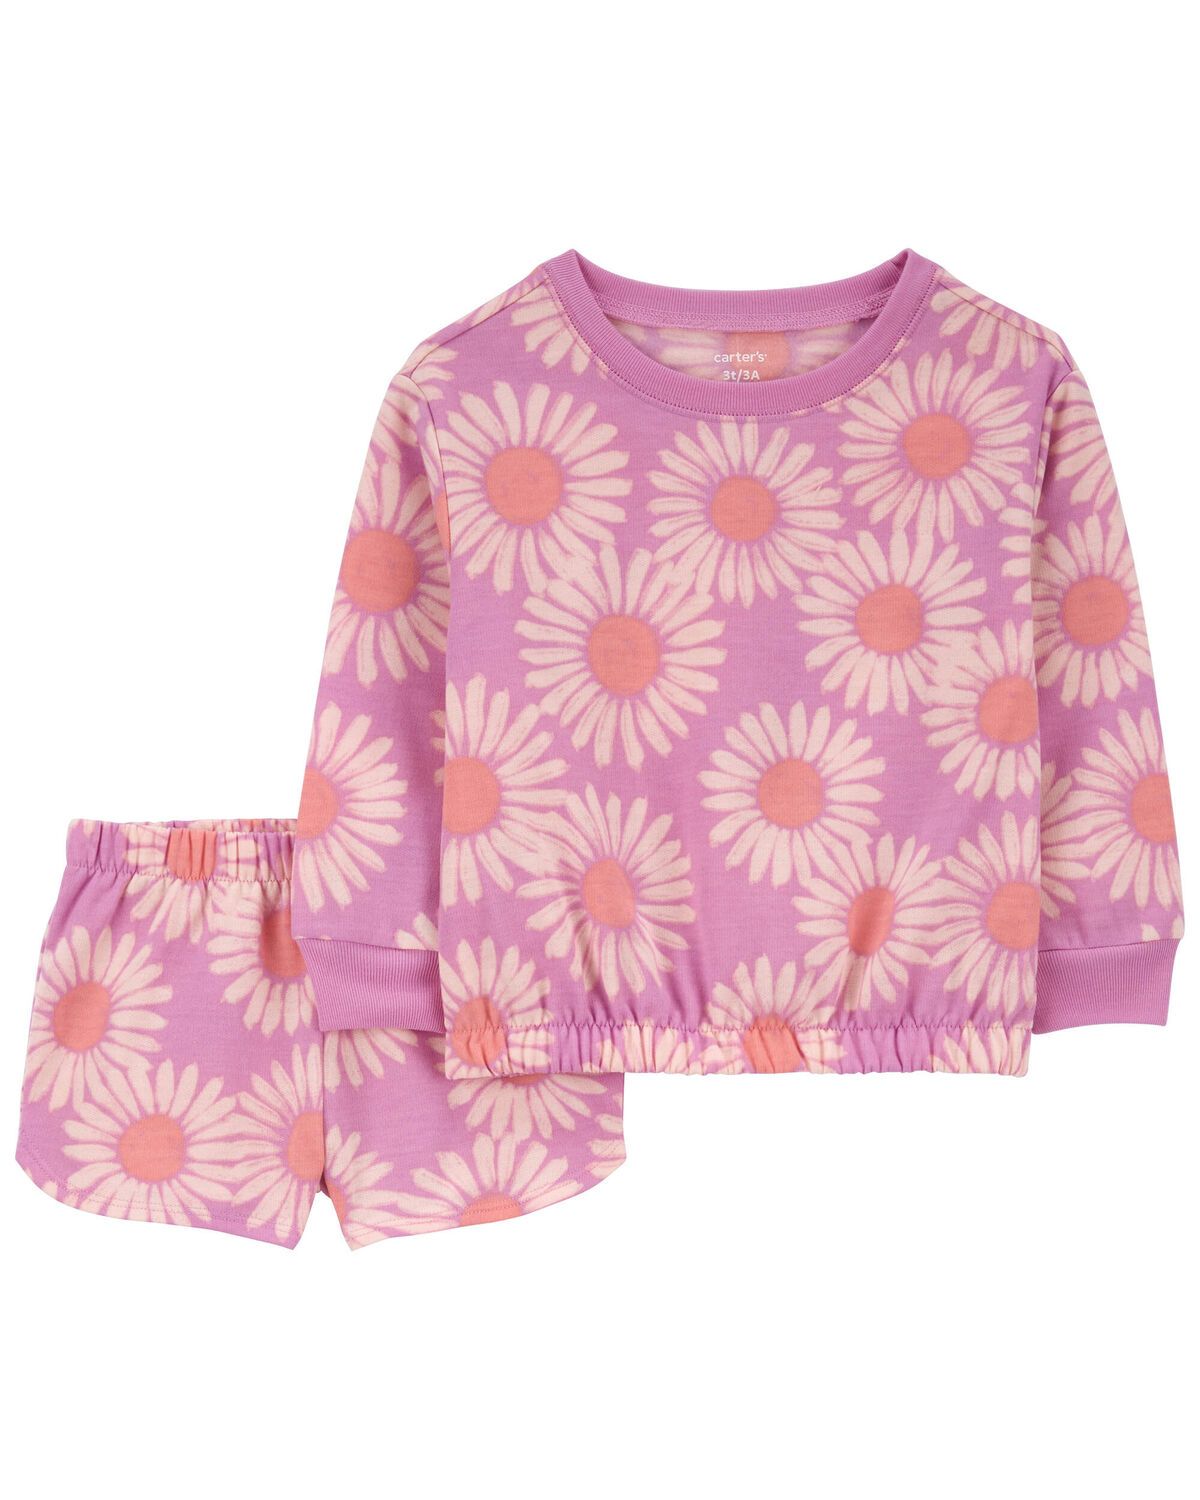 Toddler 2-Piece Daisy French Terry Pajamas | Carter's